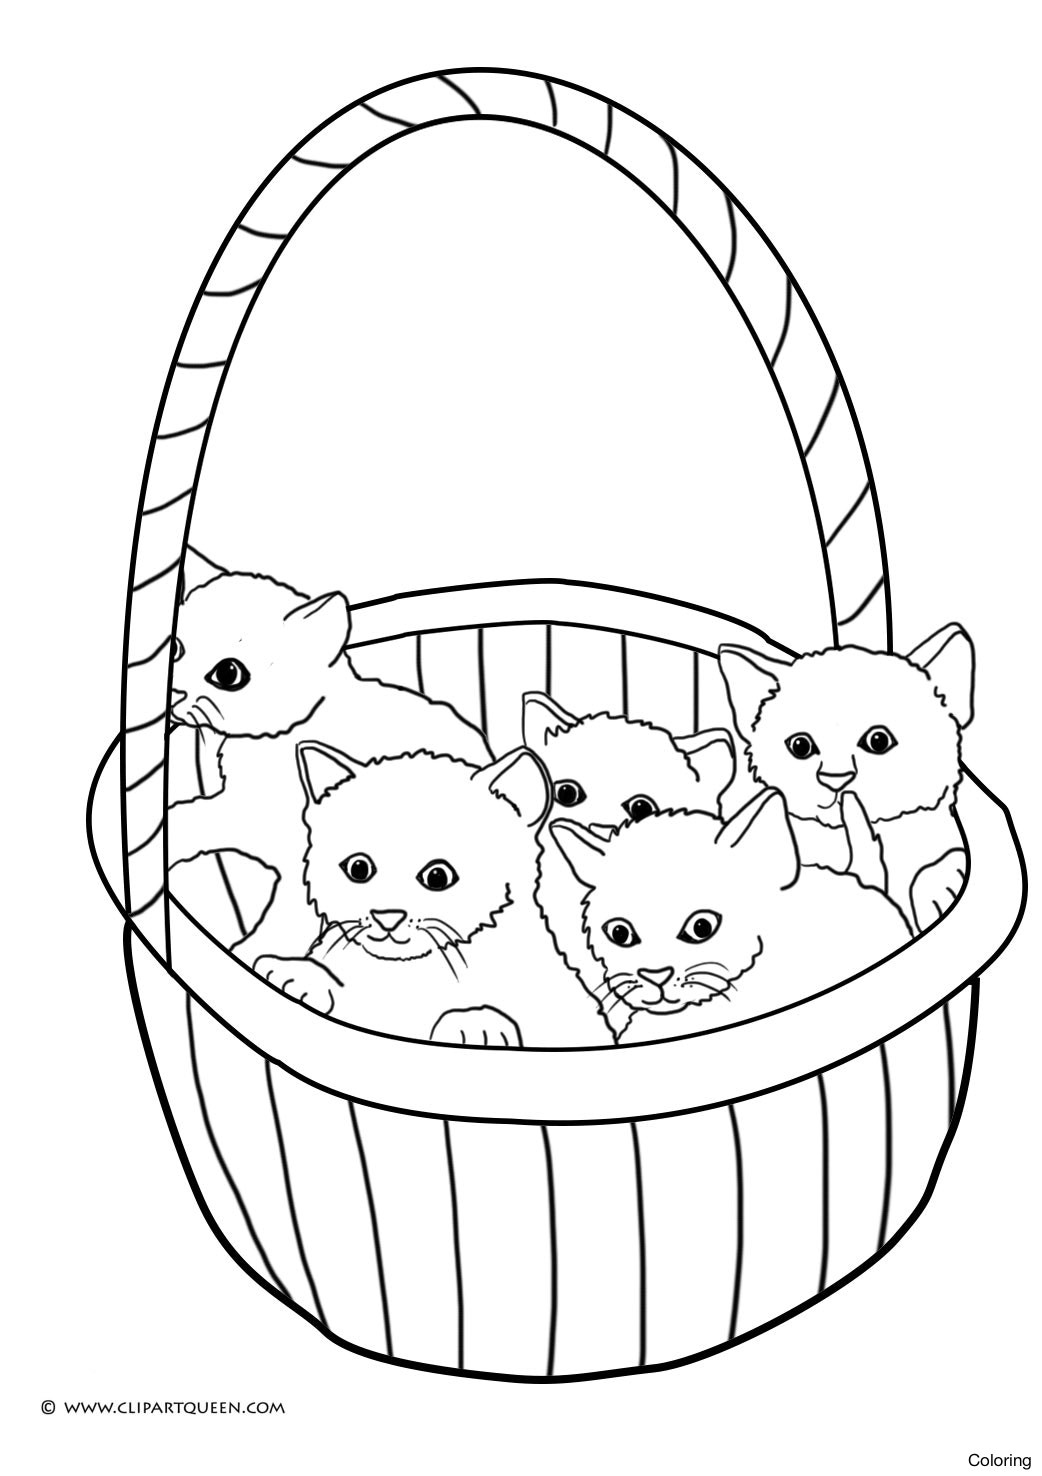 Coloring Pages Cute Kittens